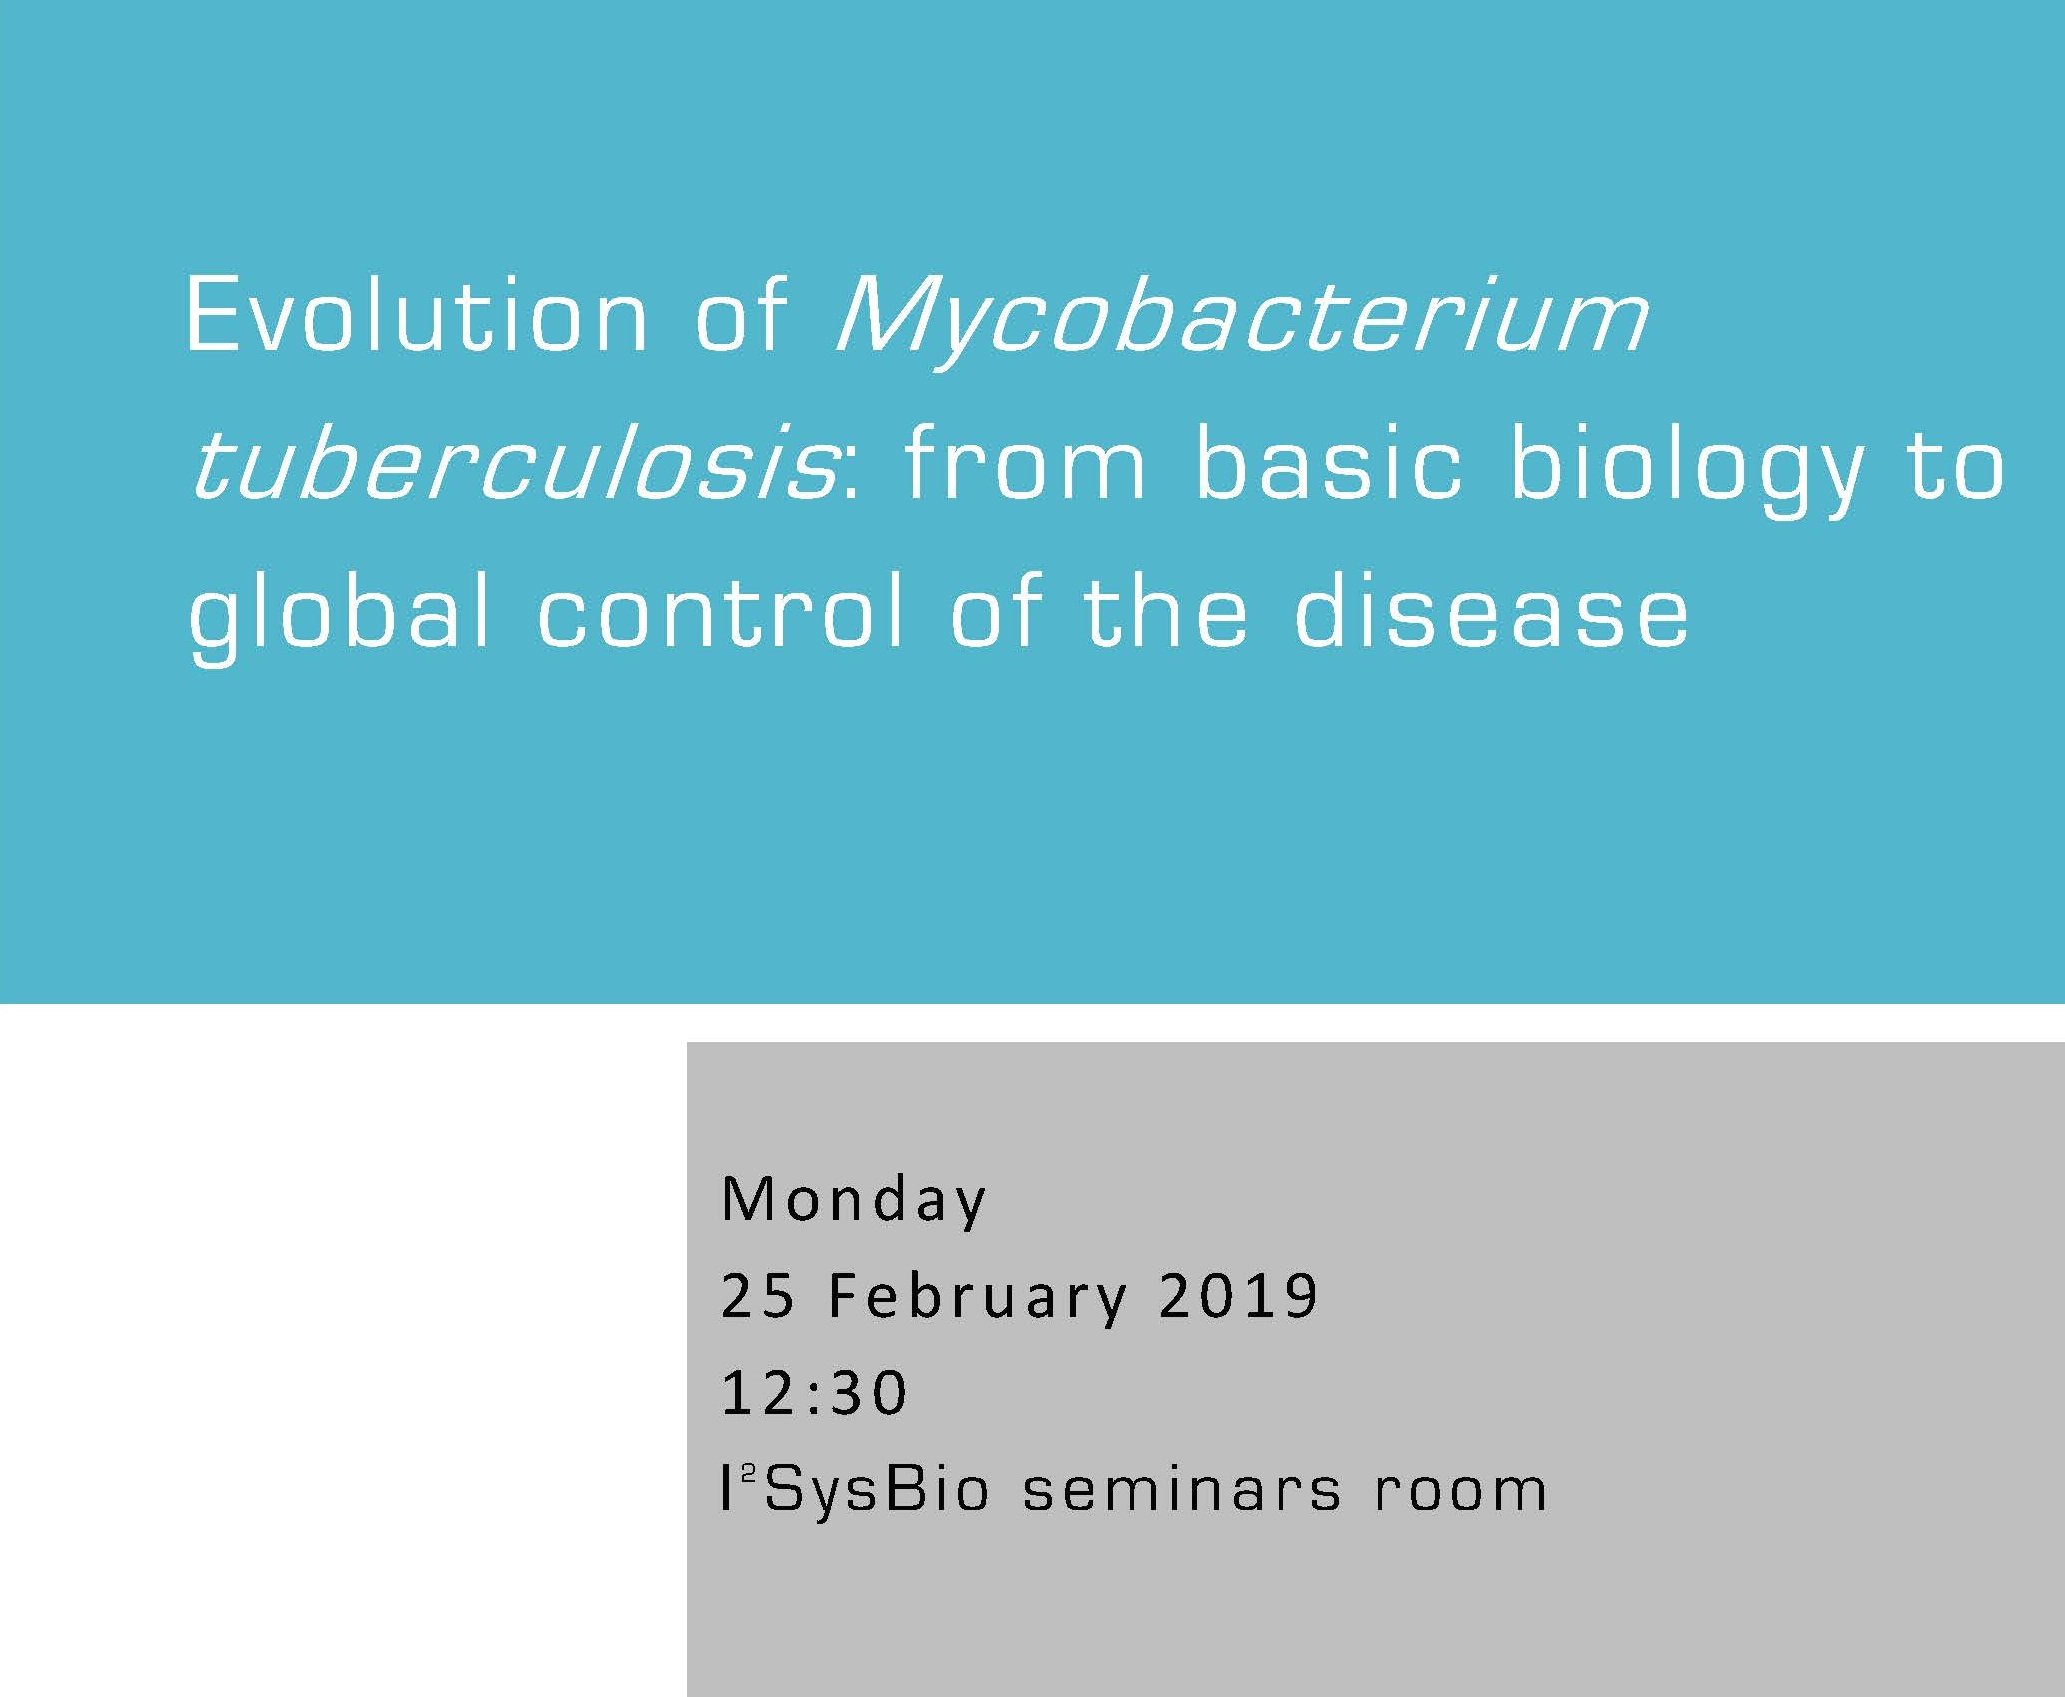 Evolution of Mycobacterium tuberculosis: from basic biology to global control of the disease